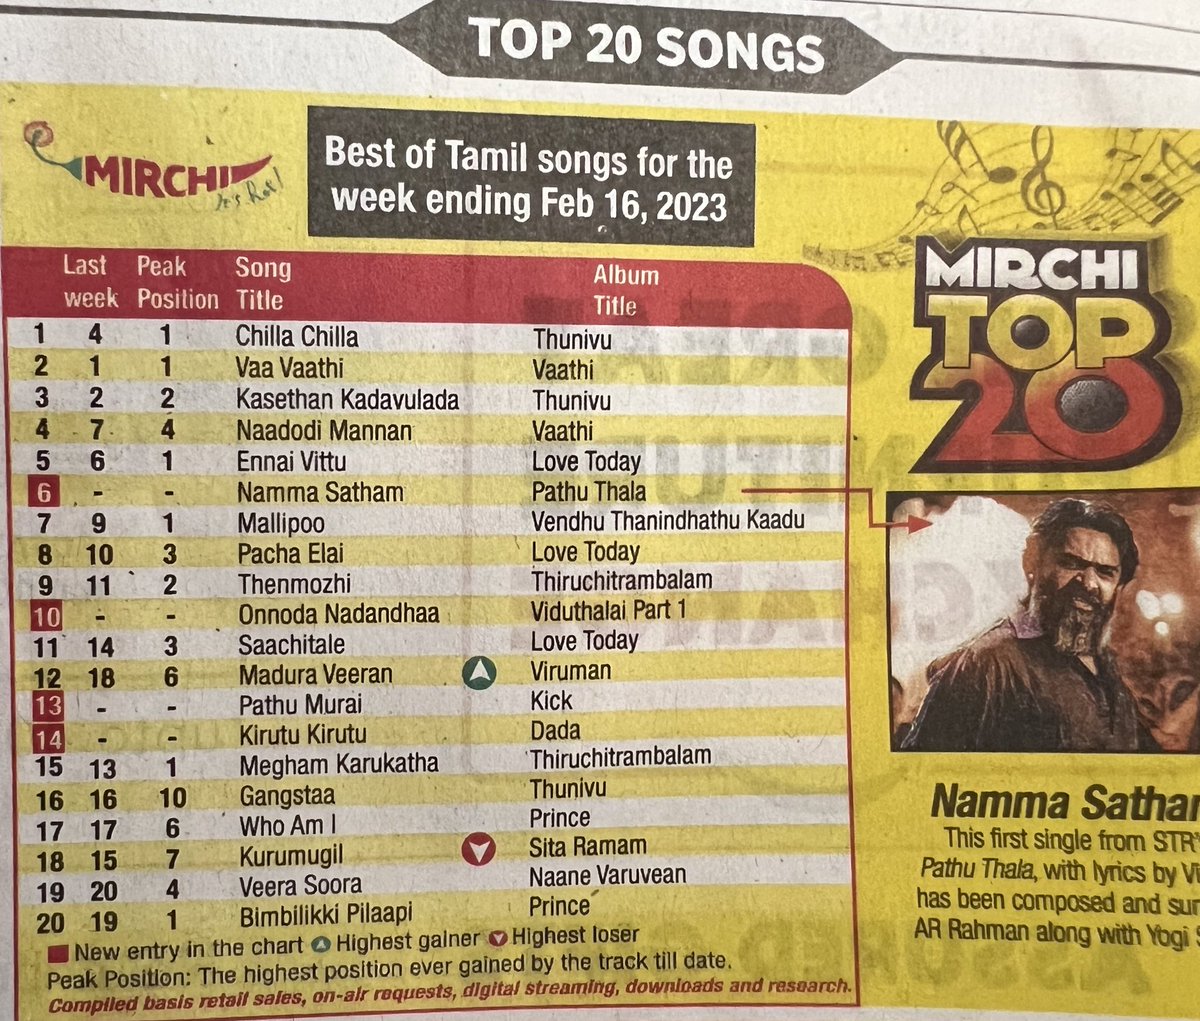 #ChillaChilla was released 2 months back, but still it takes the 🥇. #KaasethaanKadavulada bags the 🥉. #Thunivu album ❤️‍🔥. Mirchi Top 20!